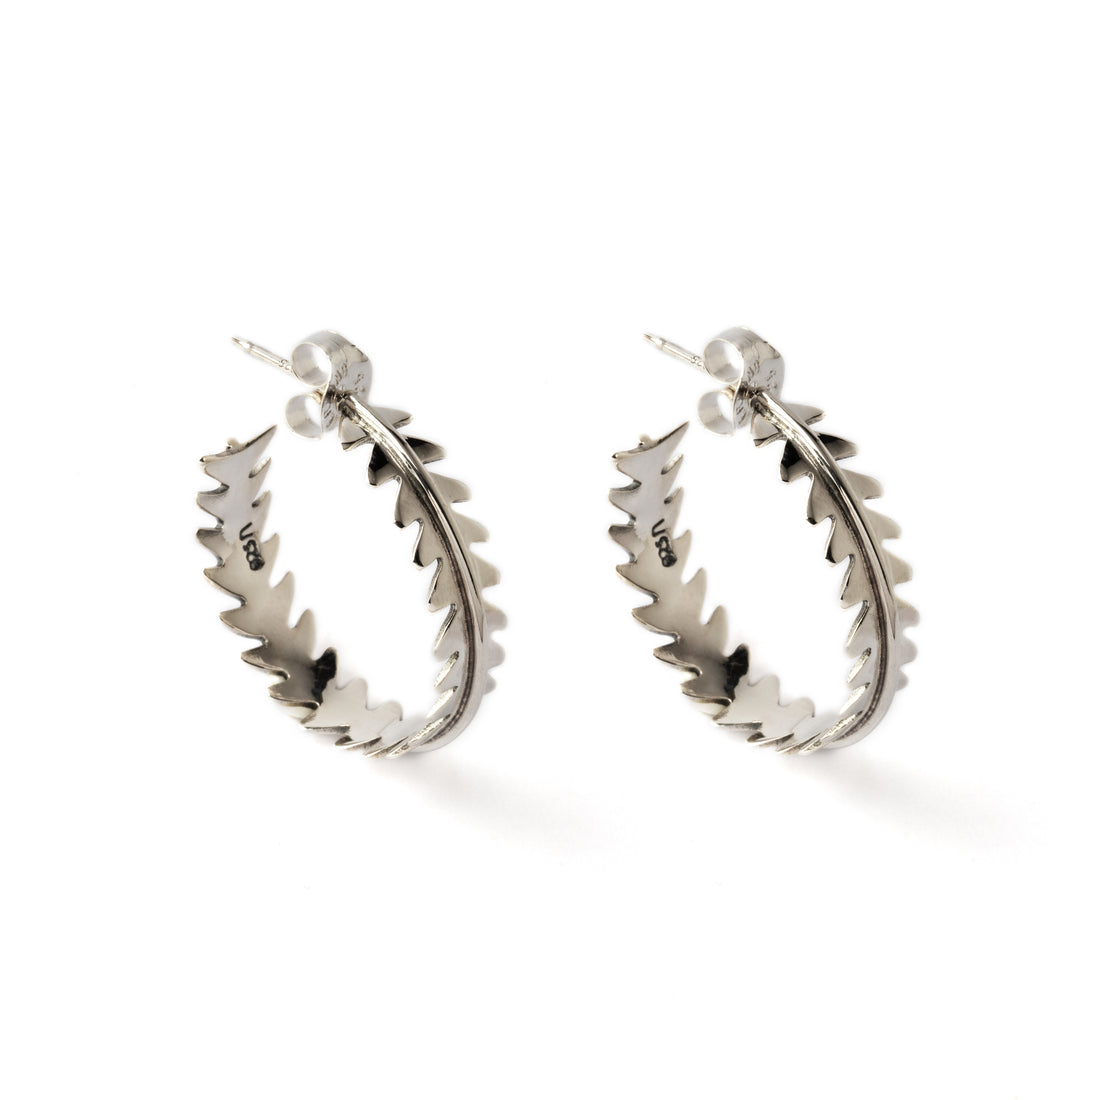 Sterling silver leaf shaped open hoops earrings with a push back closure side and frontal view